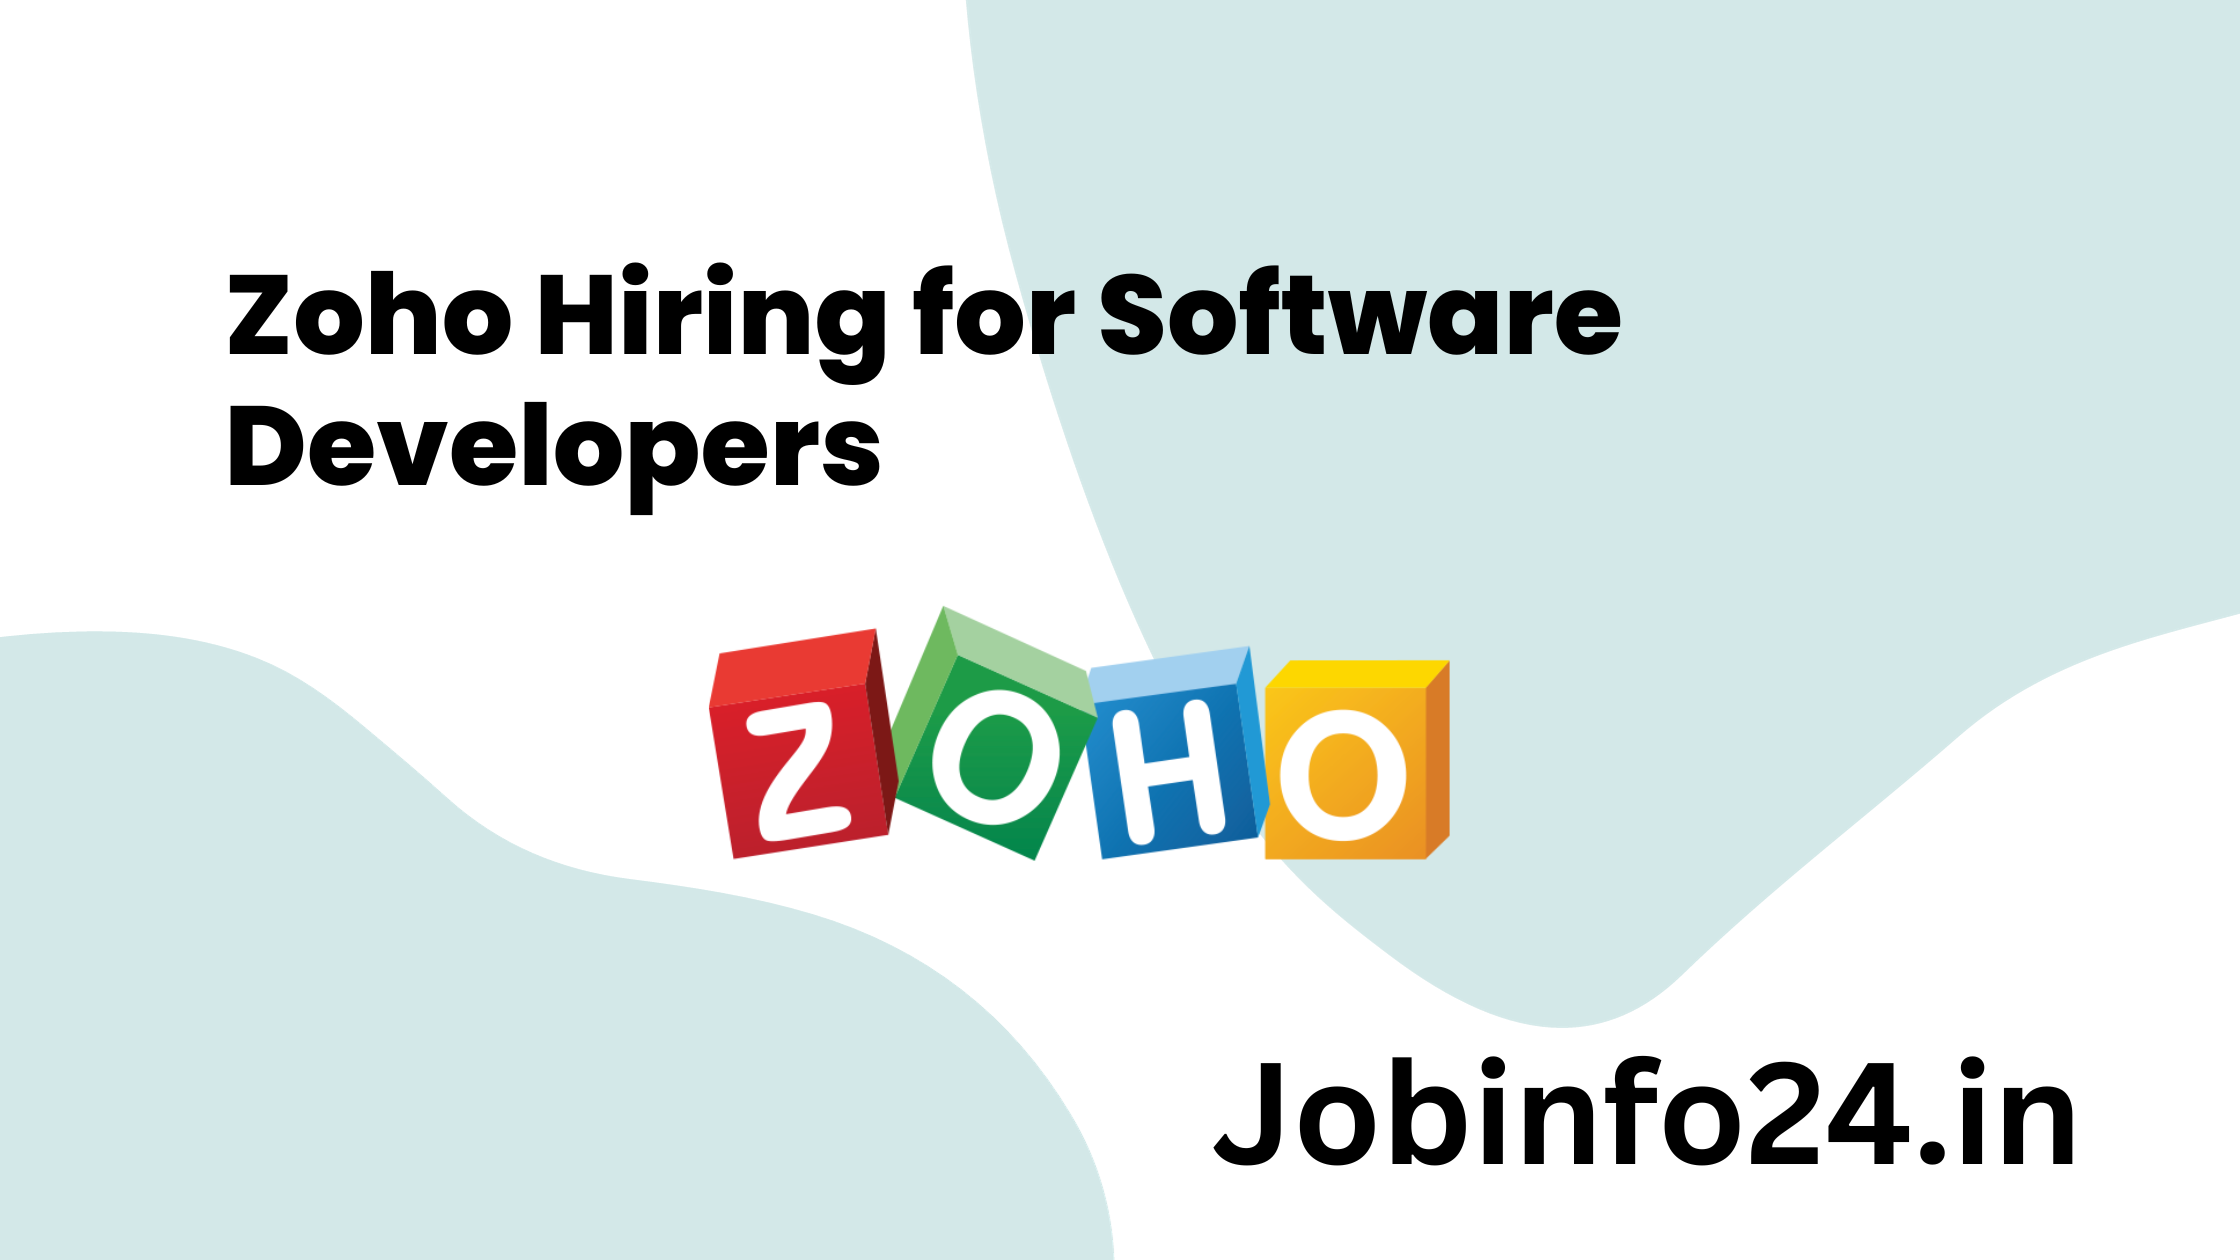 Zoho Hiring for Software Developers